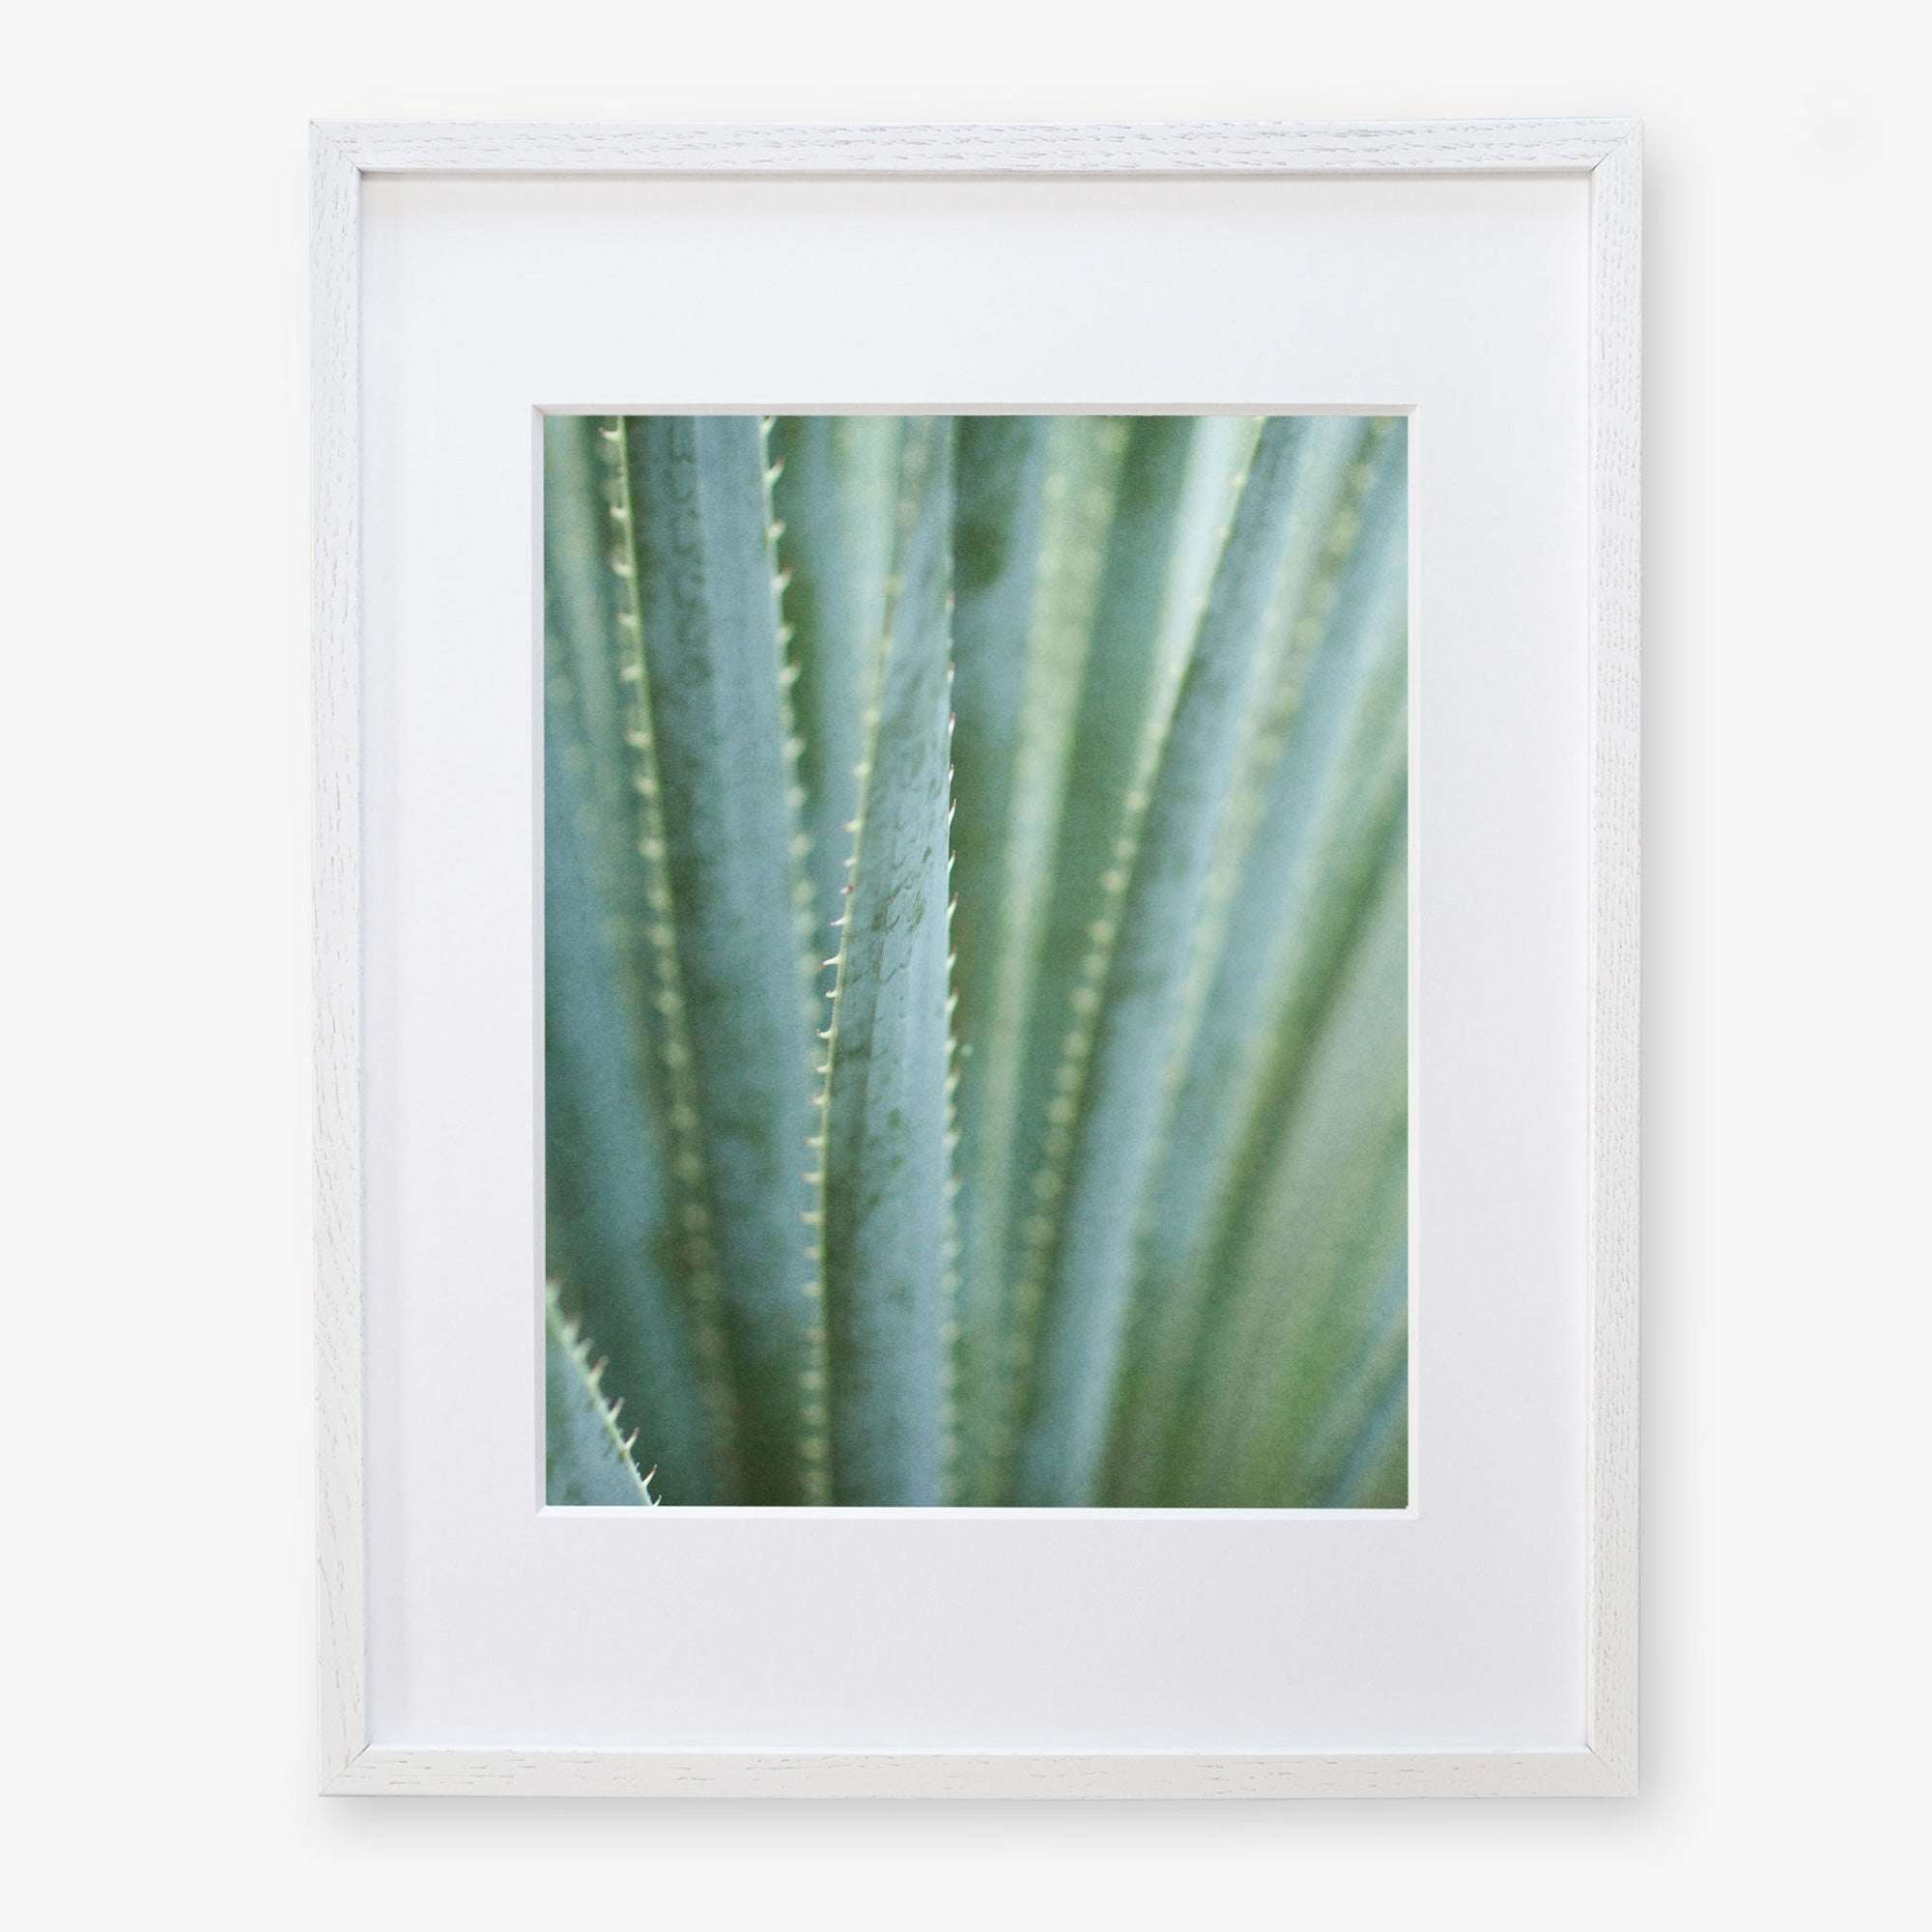 Framed photograph of a Green Botanical Print, &#39;Strands and Spikes II&#39; by Offley Green, displayed in a white frame against a white background.